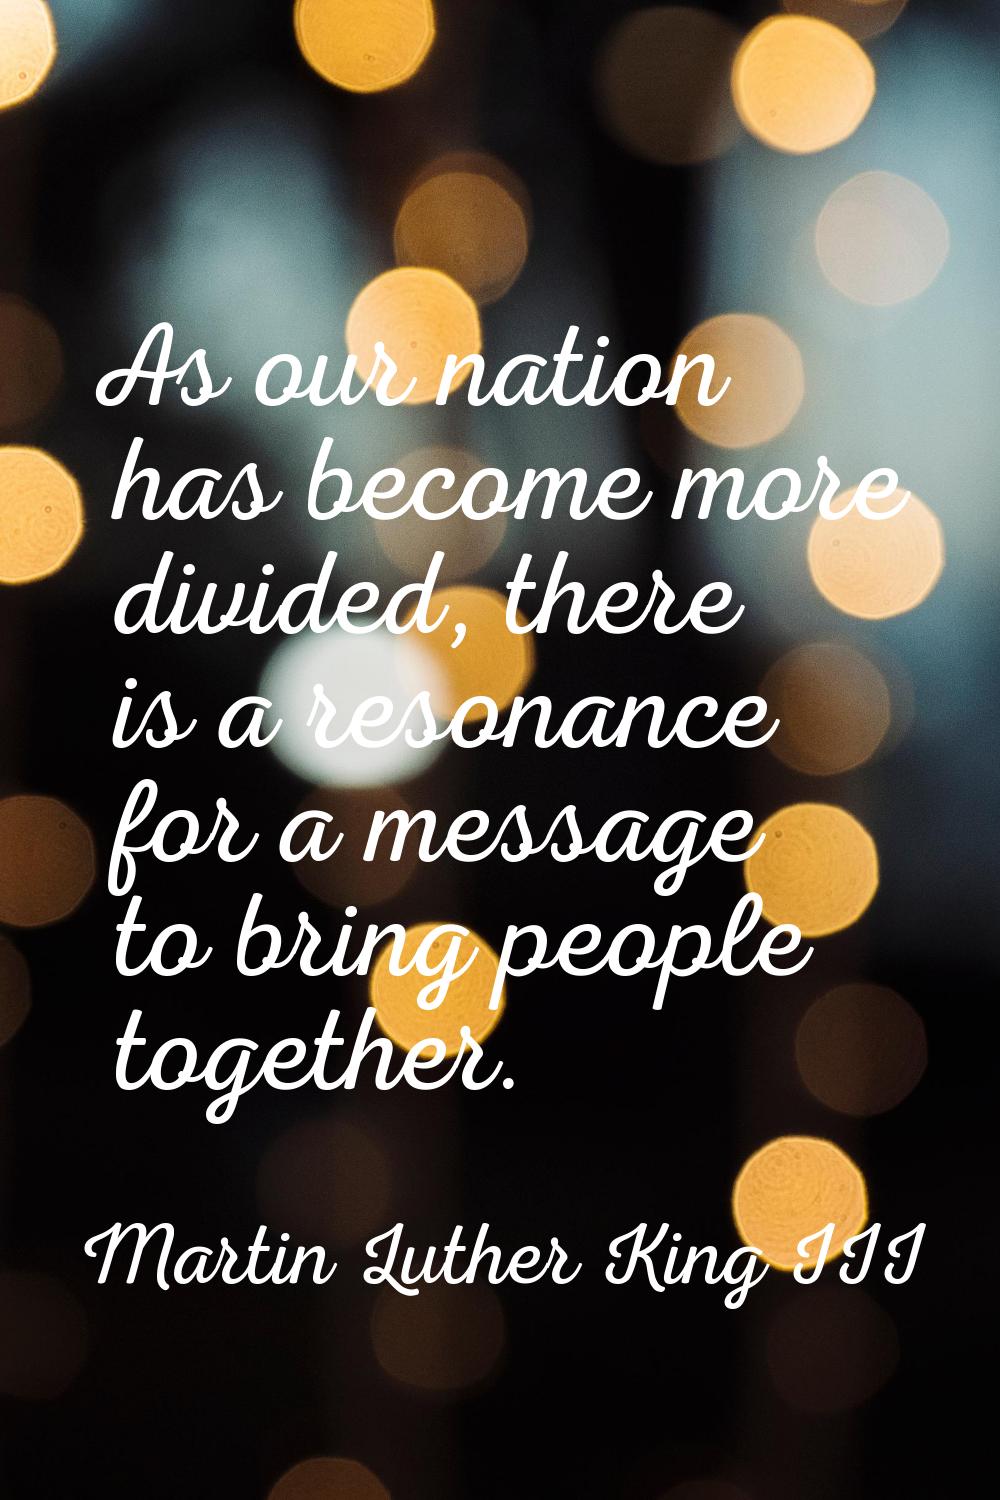 As our nation has become more divided, there is a resonance for a message to bring people together.